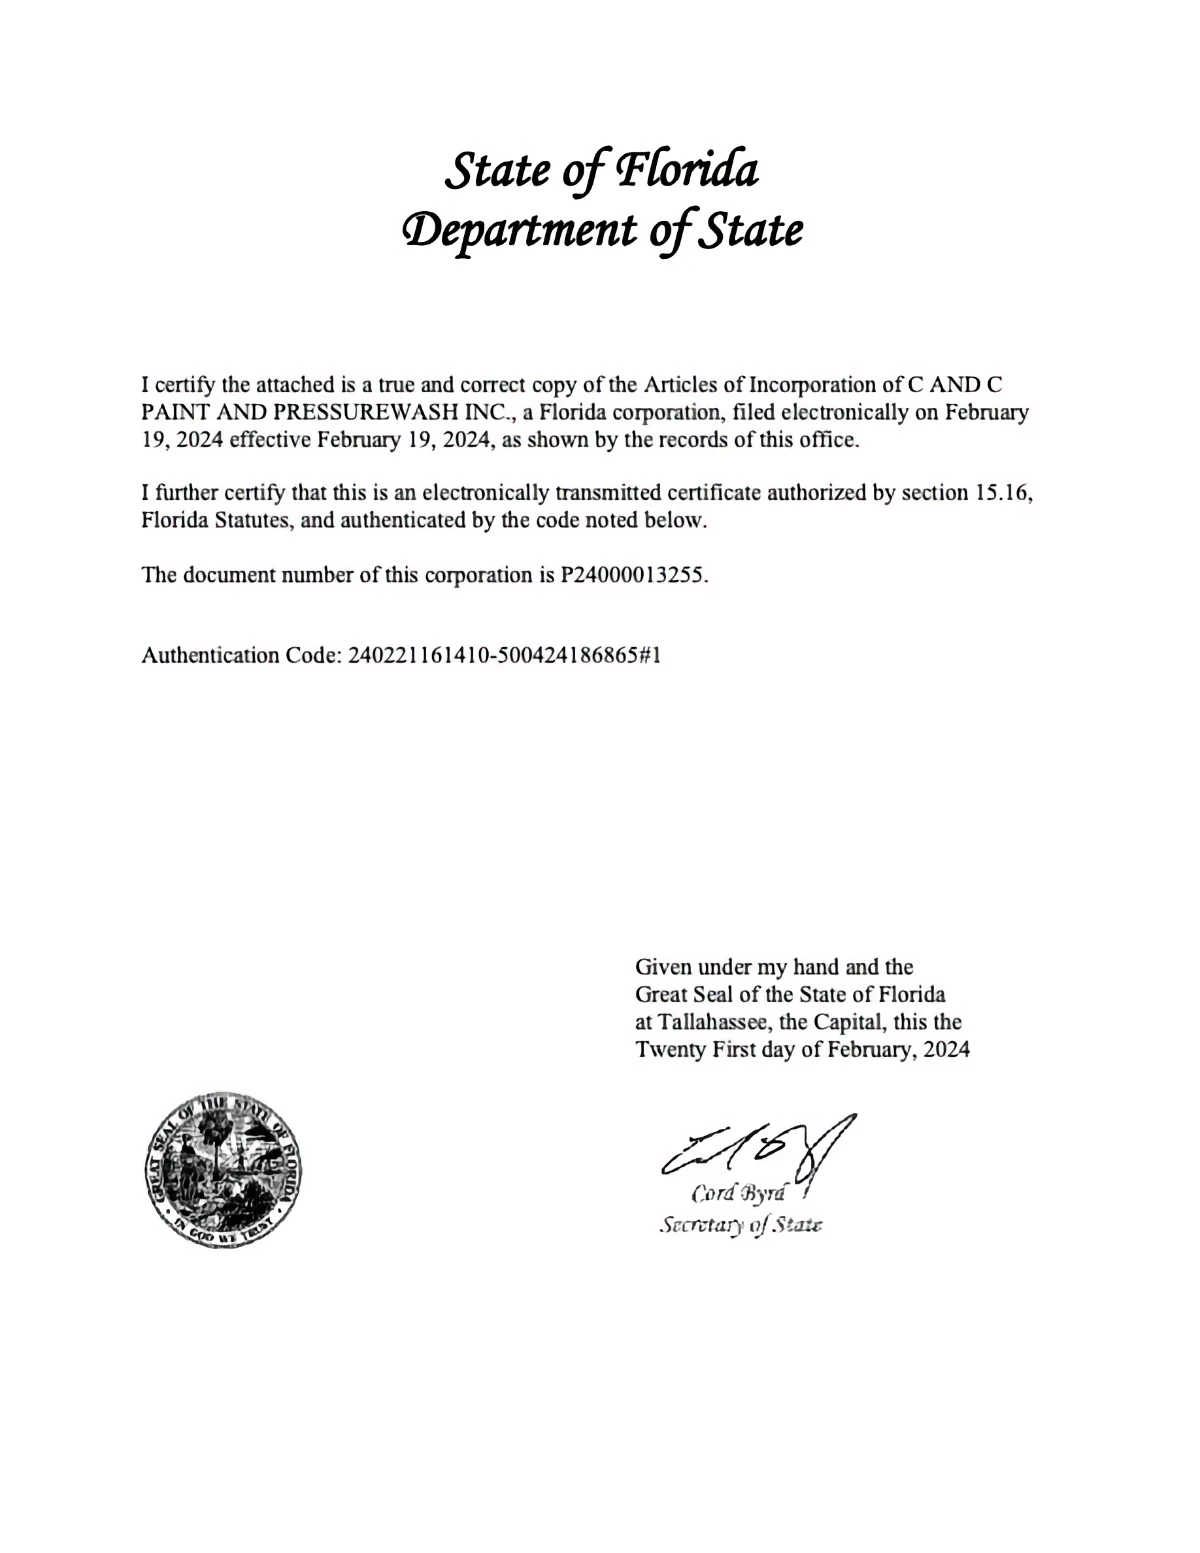 C AND C PAINT AND PRESSUREWASH INC. - FL ARTICLES OF INCORPORATION 20240219 - CERTIFICATE V01 1200x1553